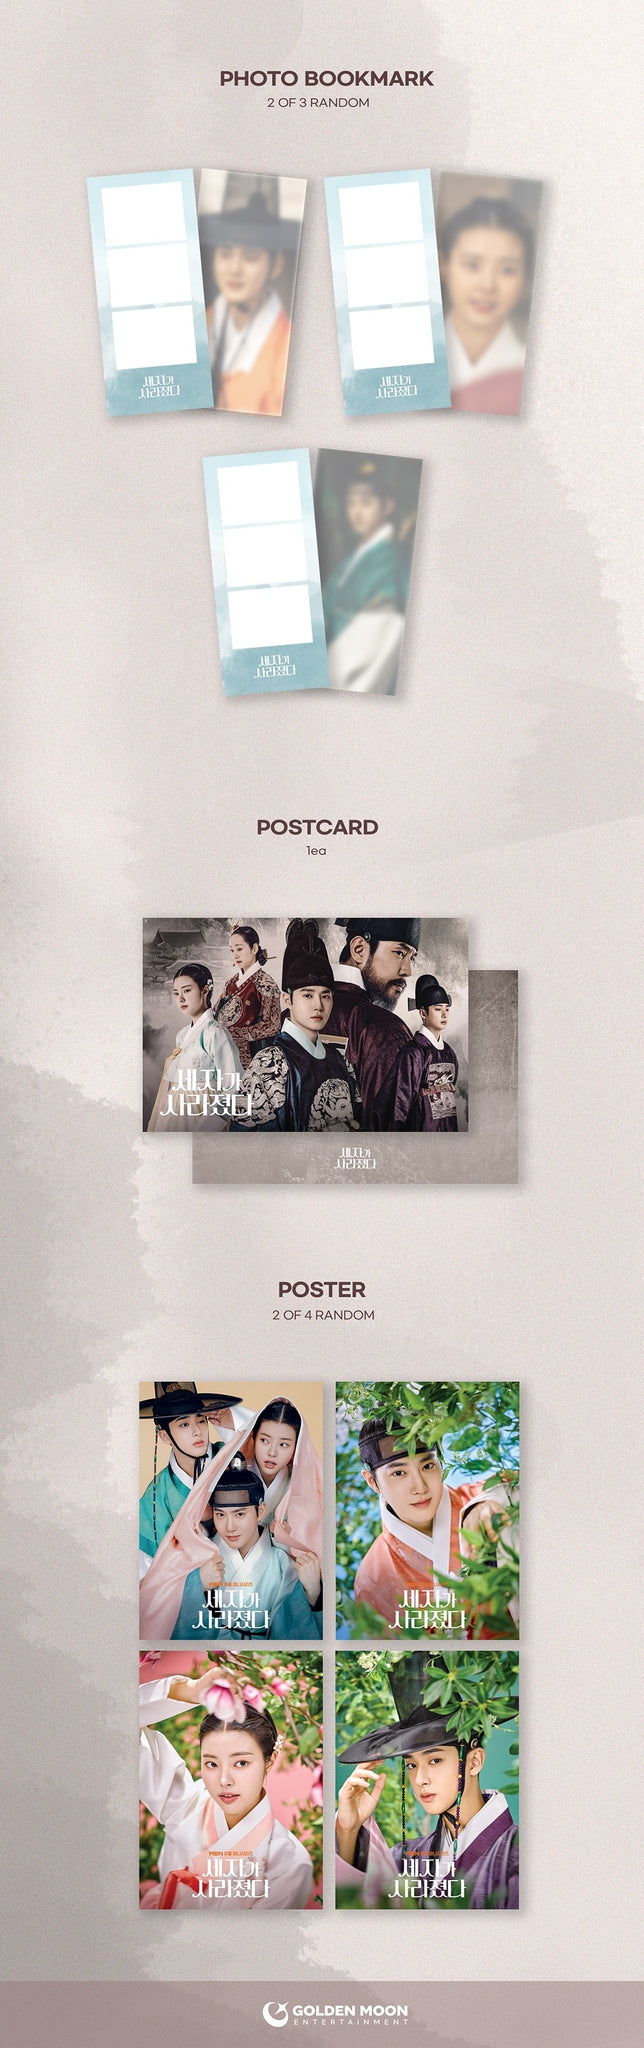 Missing Crown Prince OST Inclusions: Photo Bookmarks, Postcard, Posters